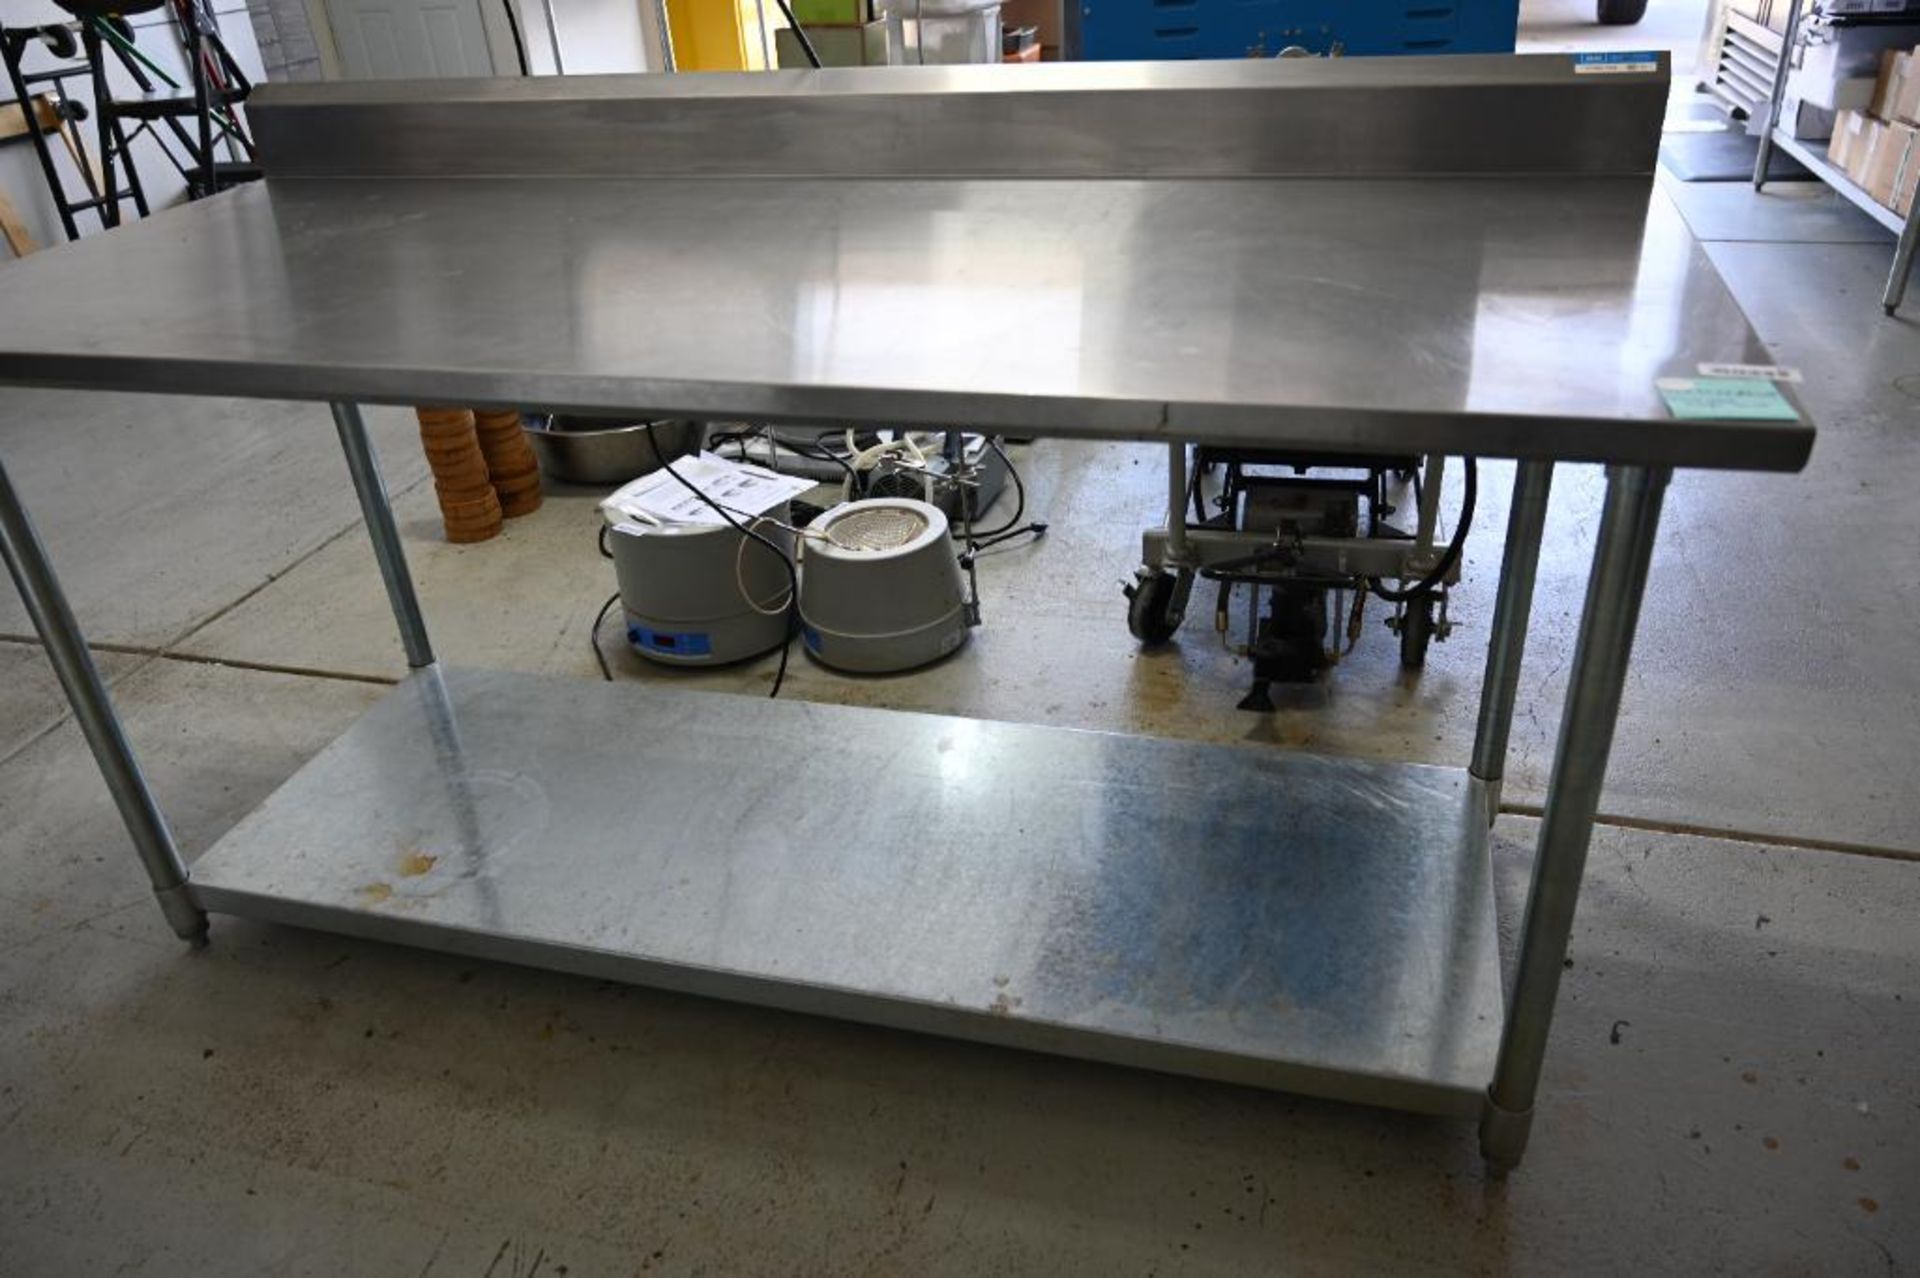 72" x 30.25"x 34.25" Stainless Steel Work Table with Back splash - Image 3 of 6